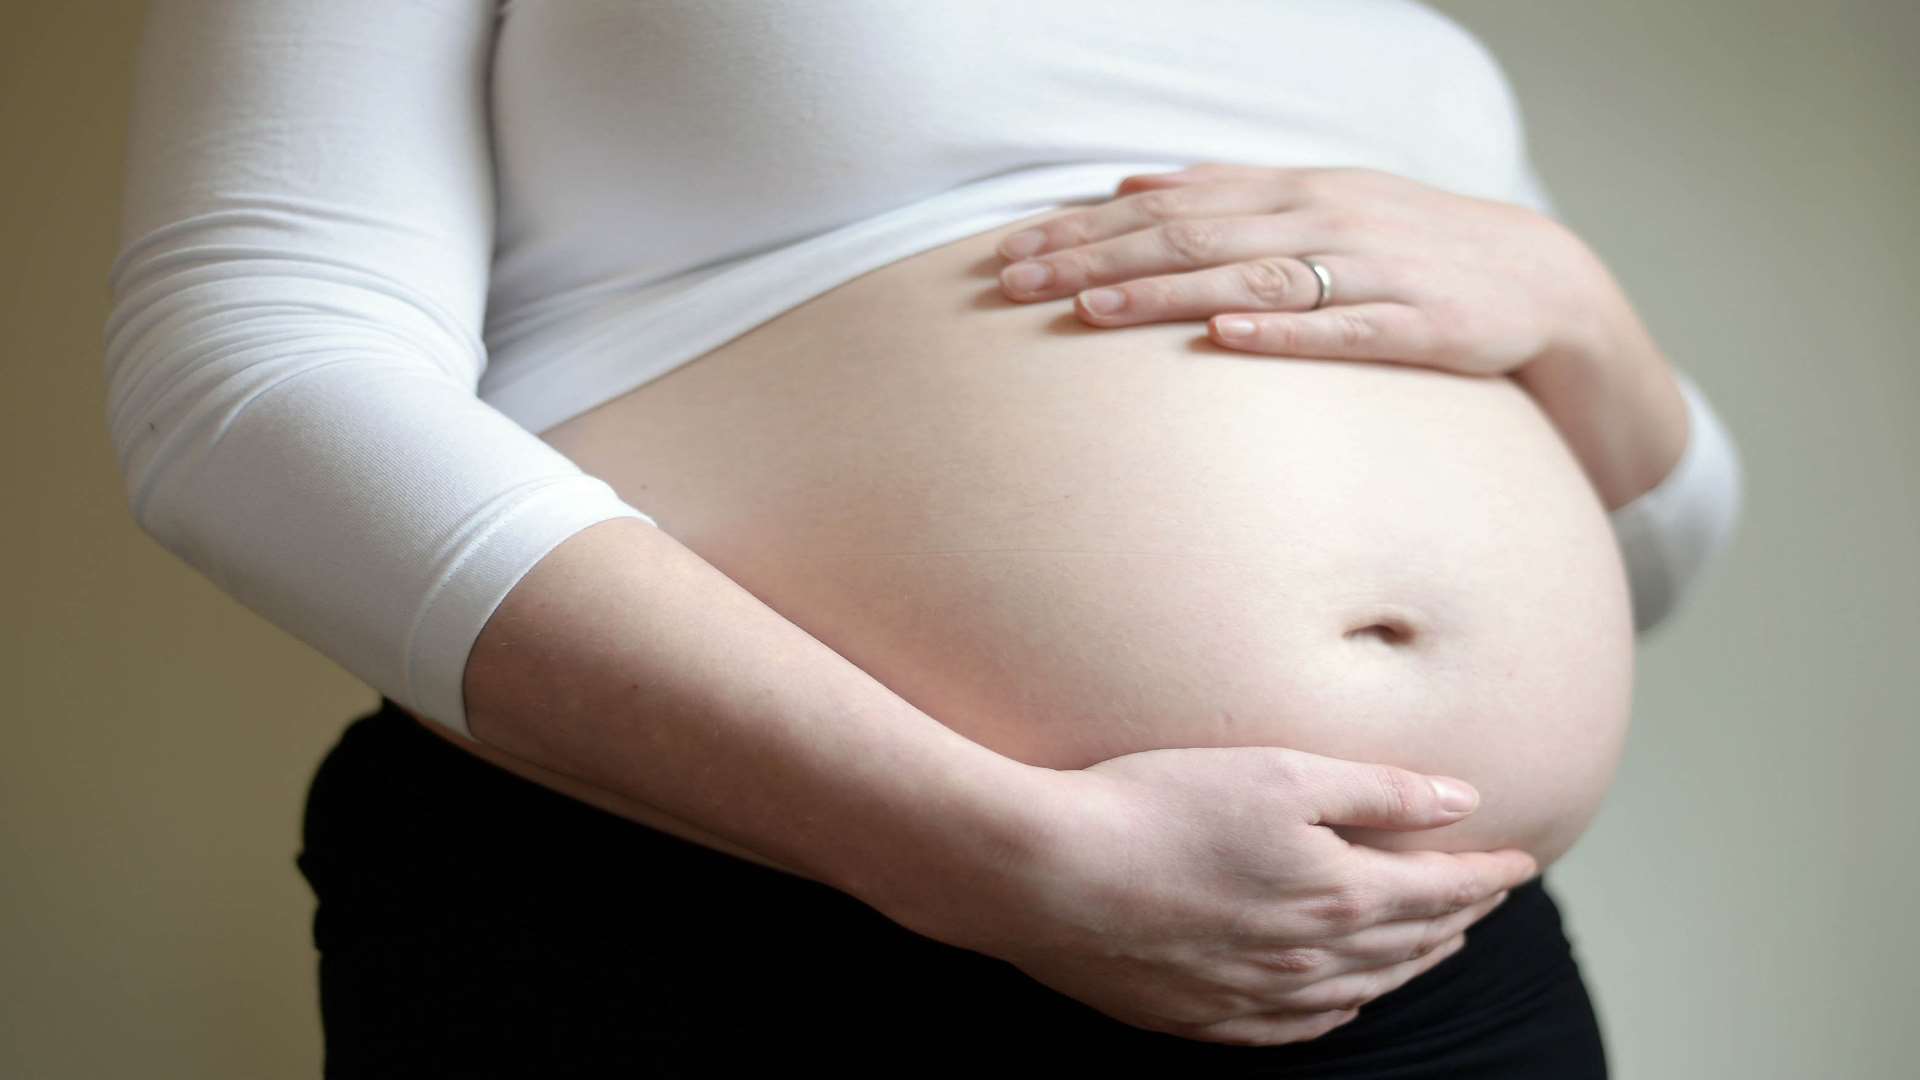 Multivitamins in pregnancy of little use, say researchers